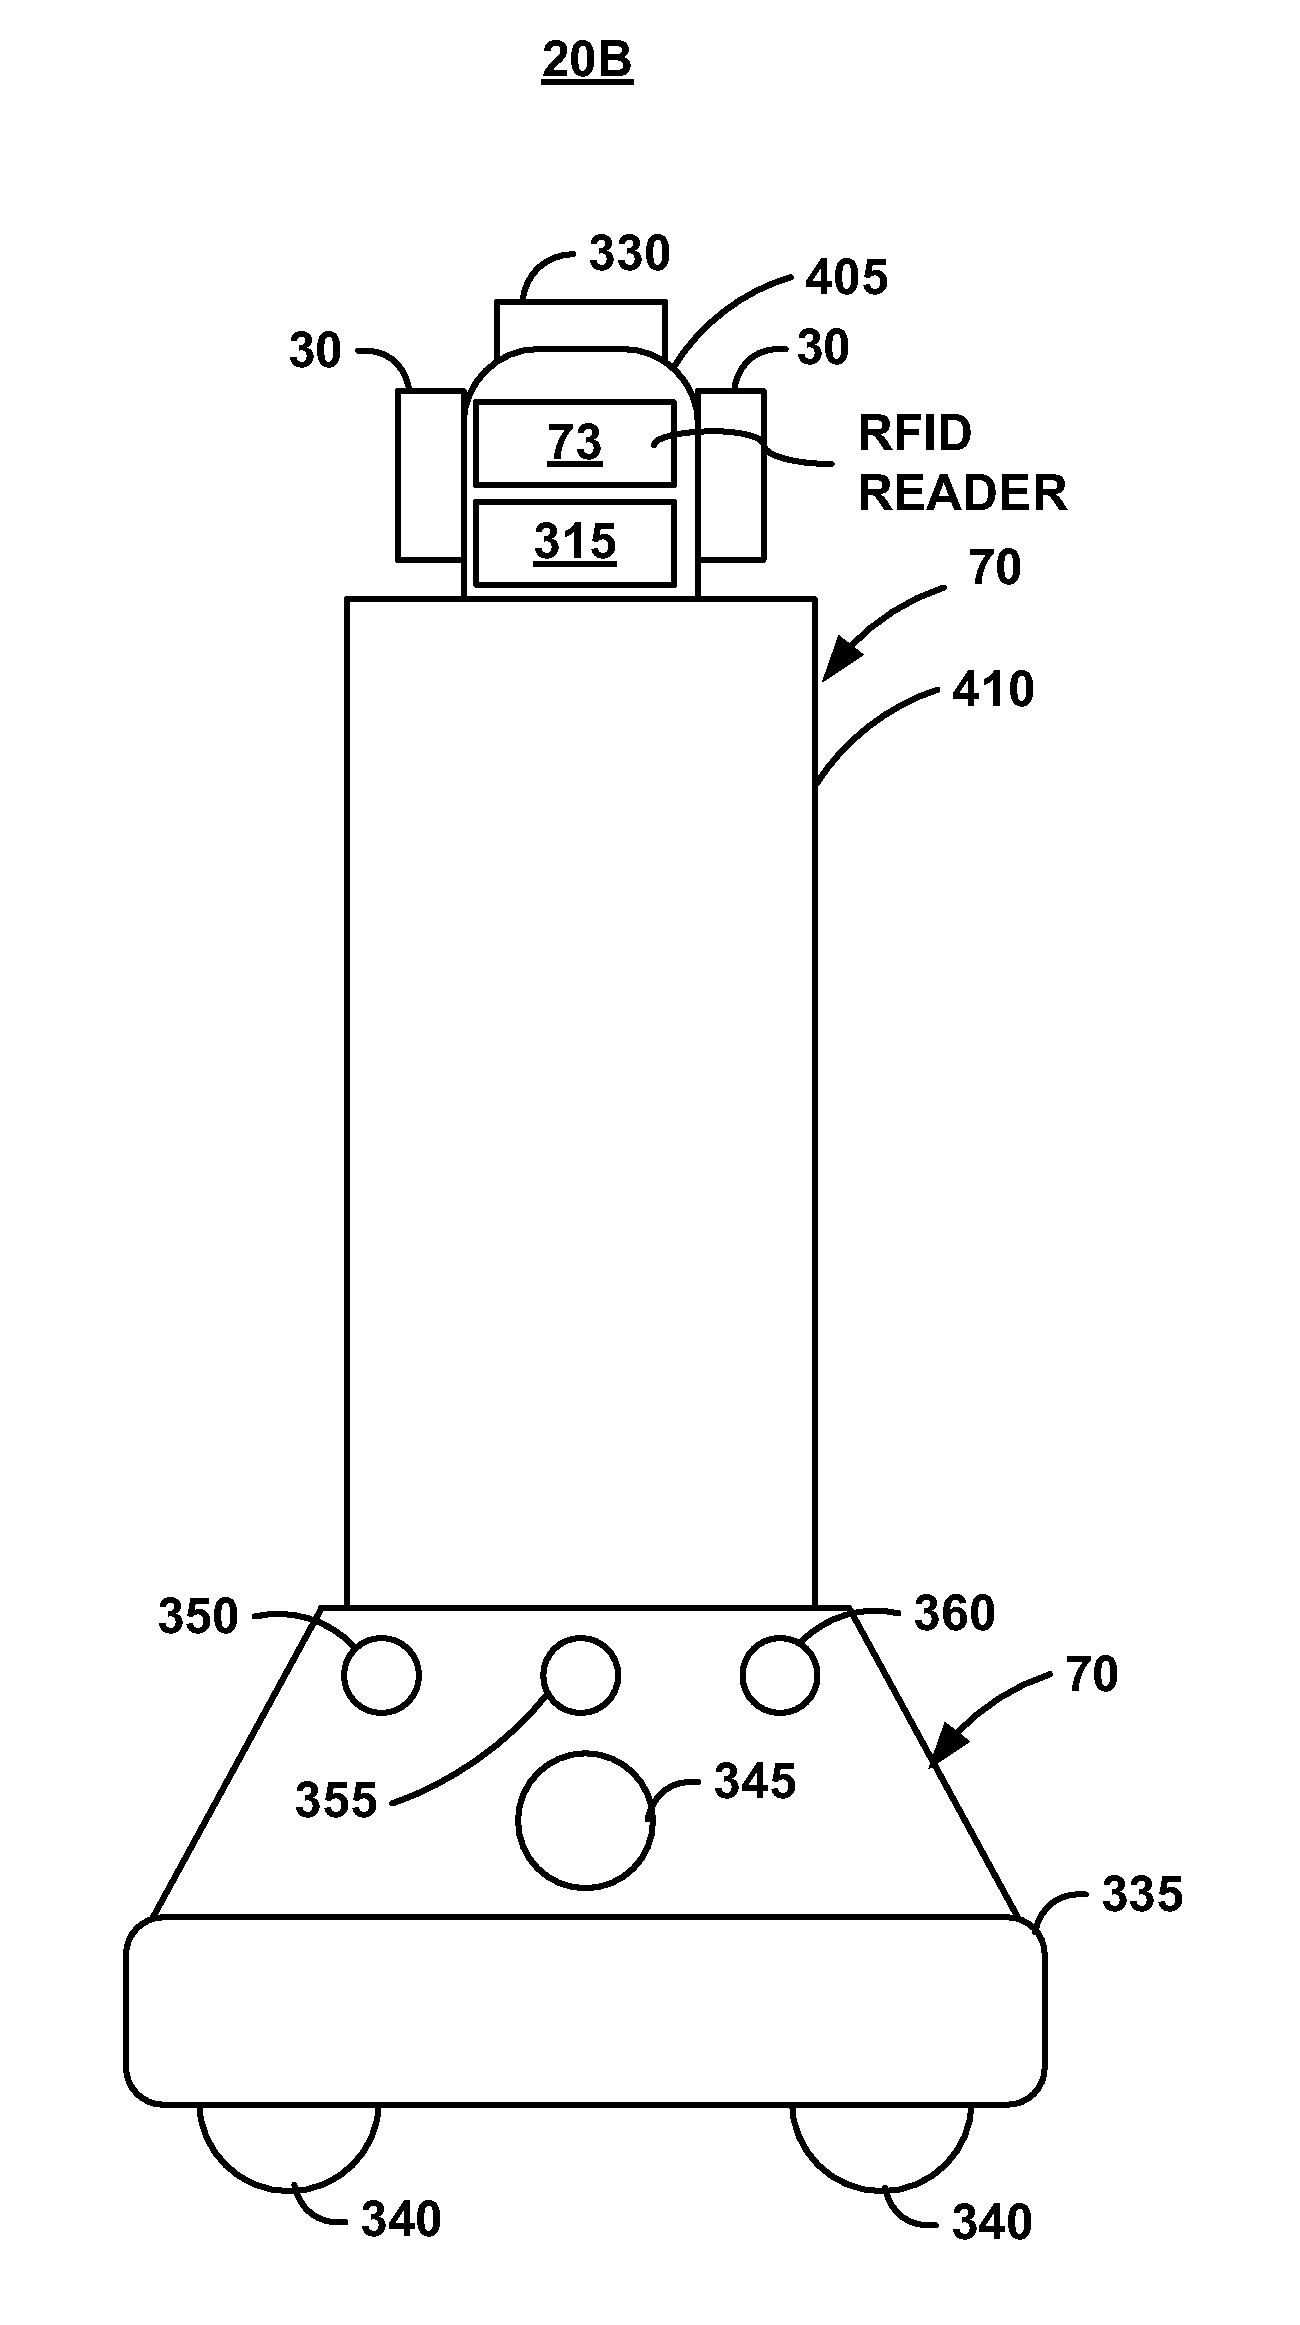 System and method for performing inventory using a mobile inventory robot